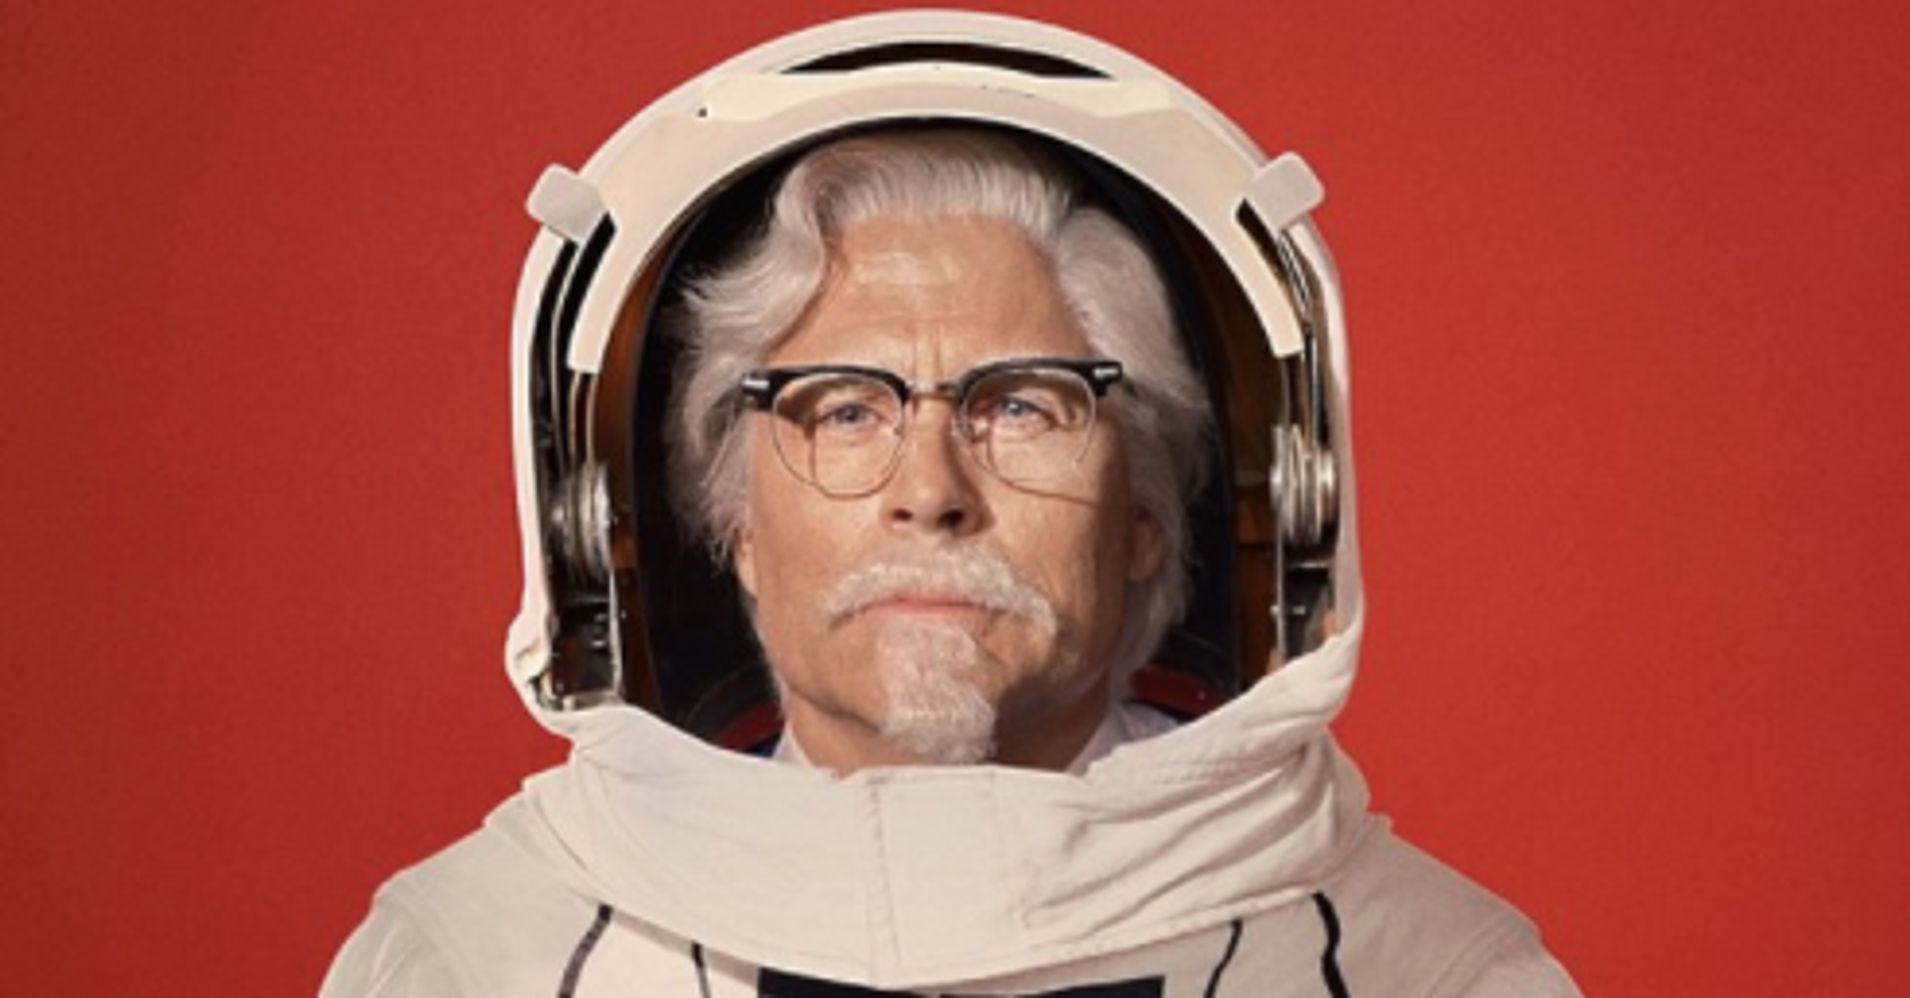 Wait, Rob Lowe Is The New KFC Colonel? HuffPost